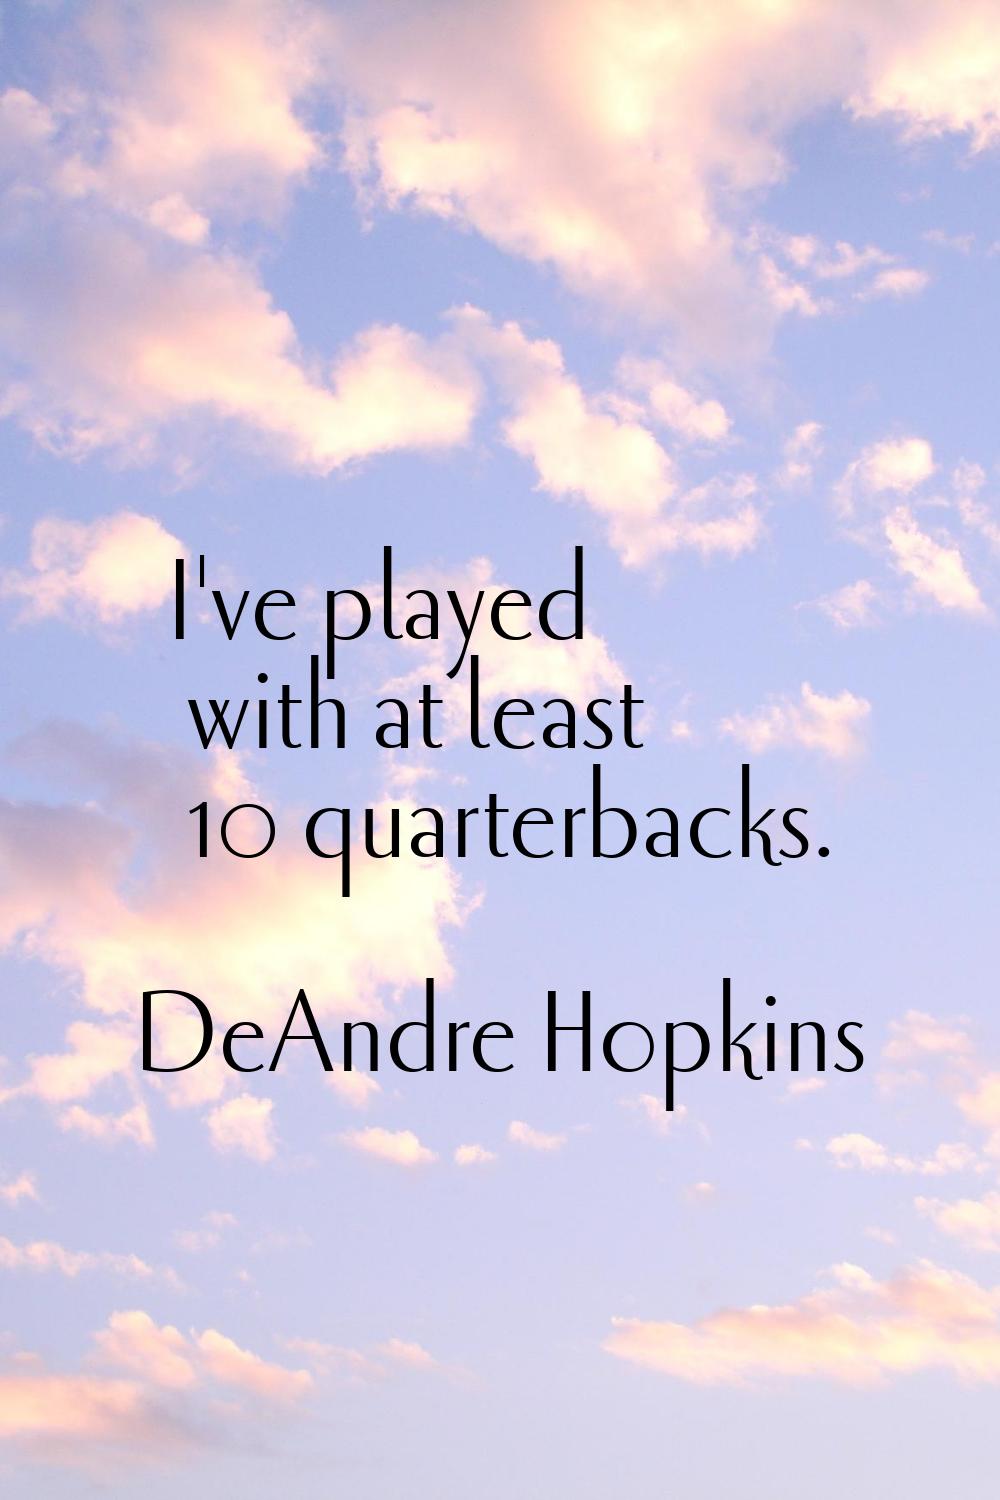 I've played with at least 10 quarterbacks.